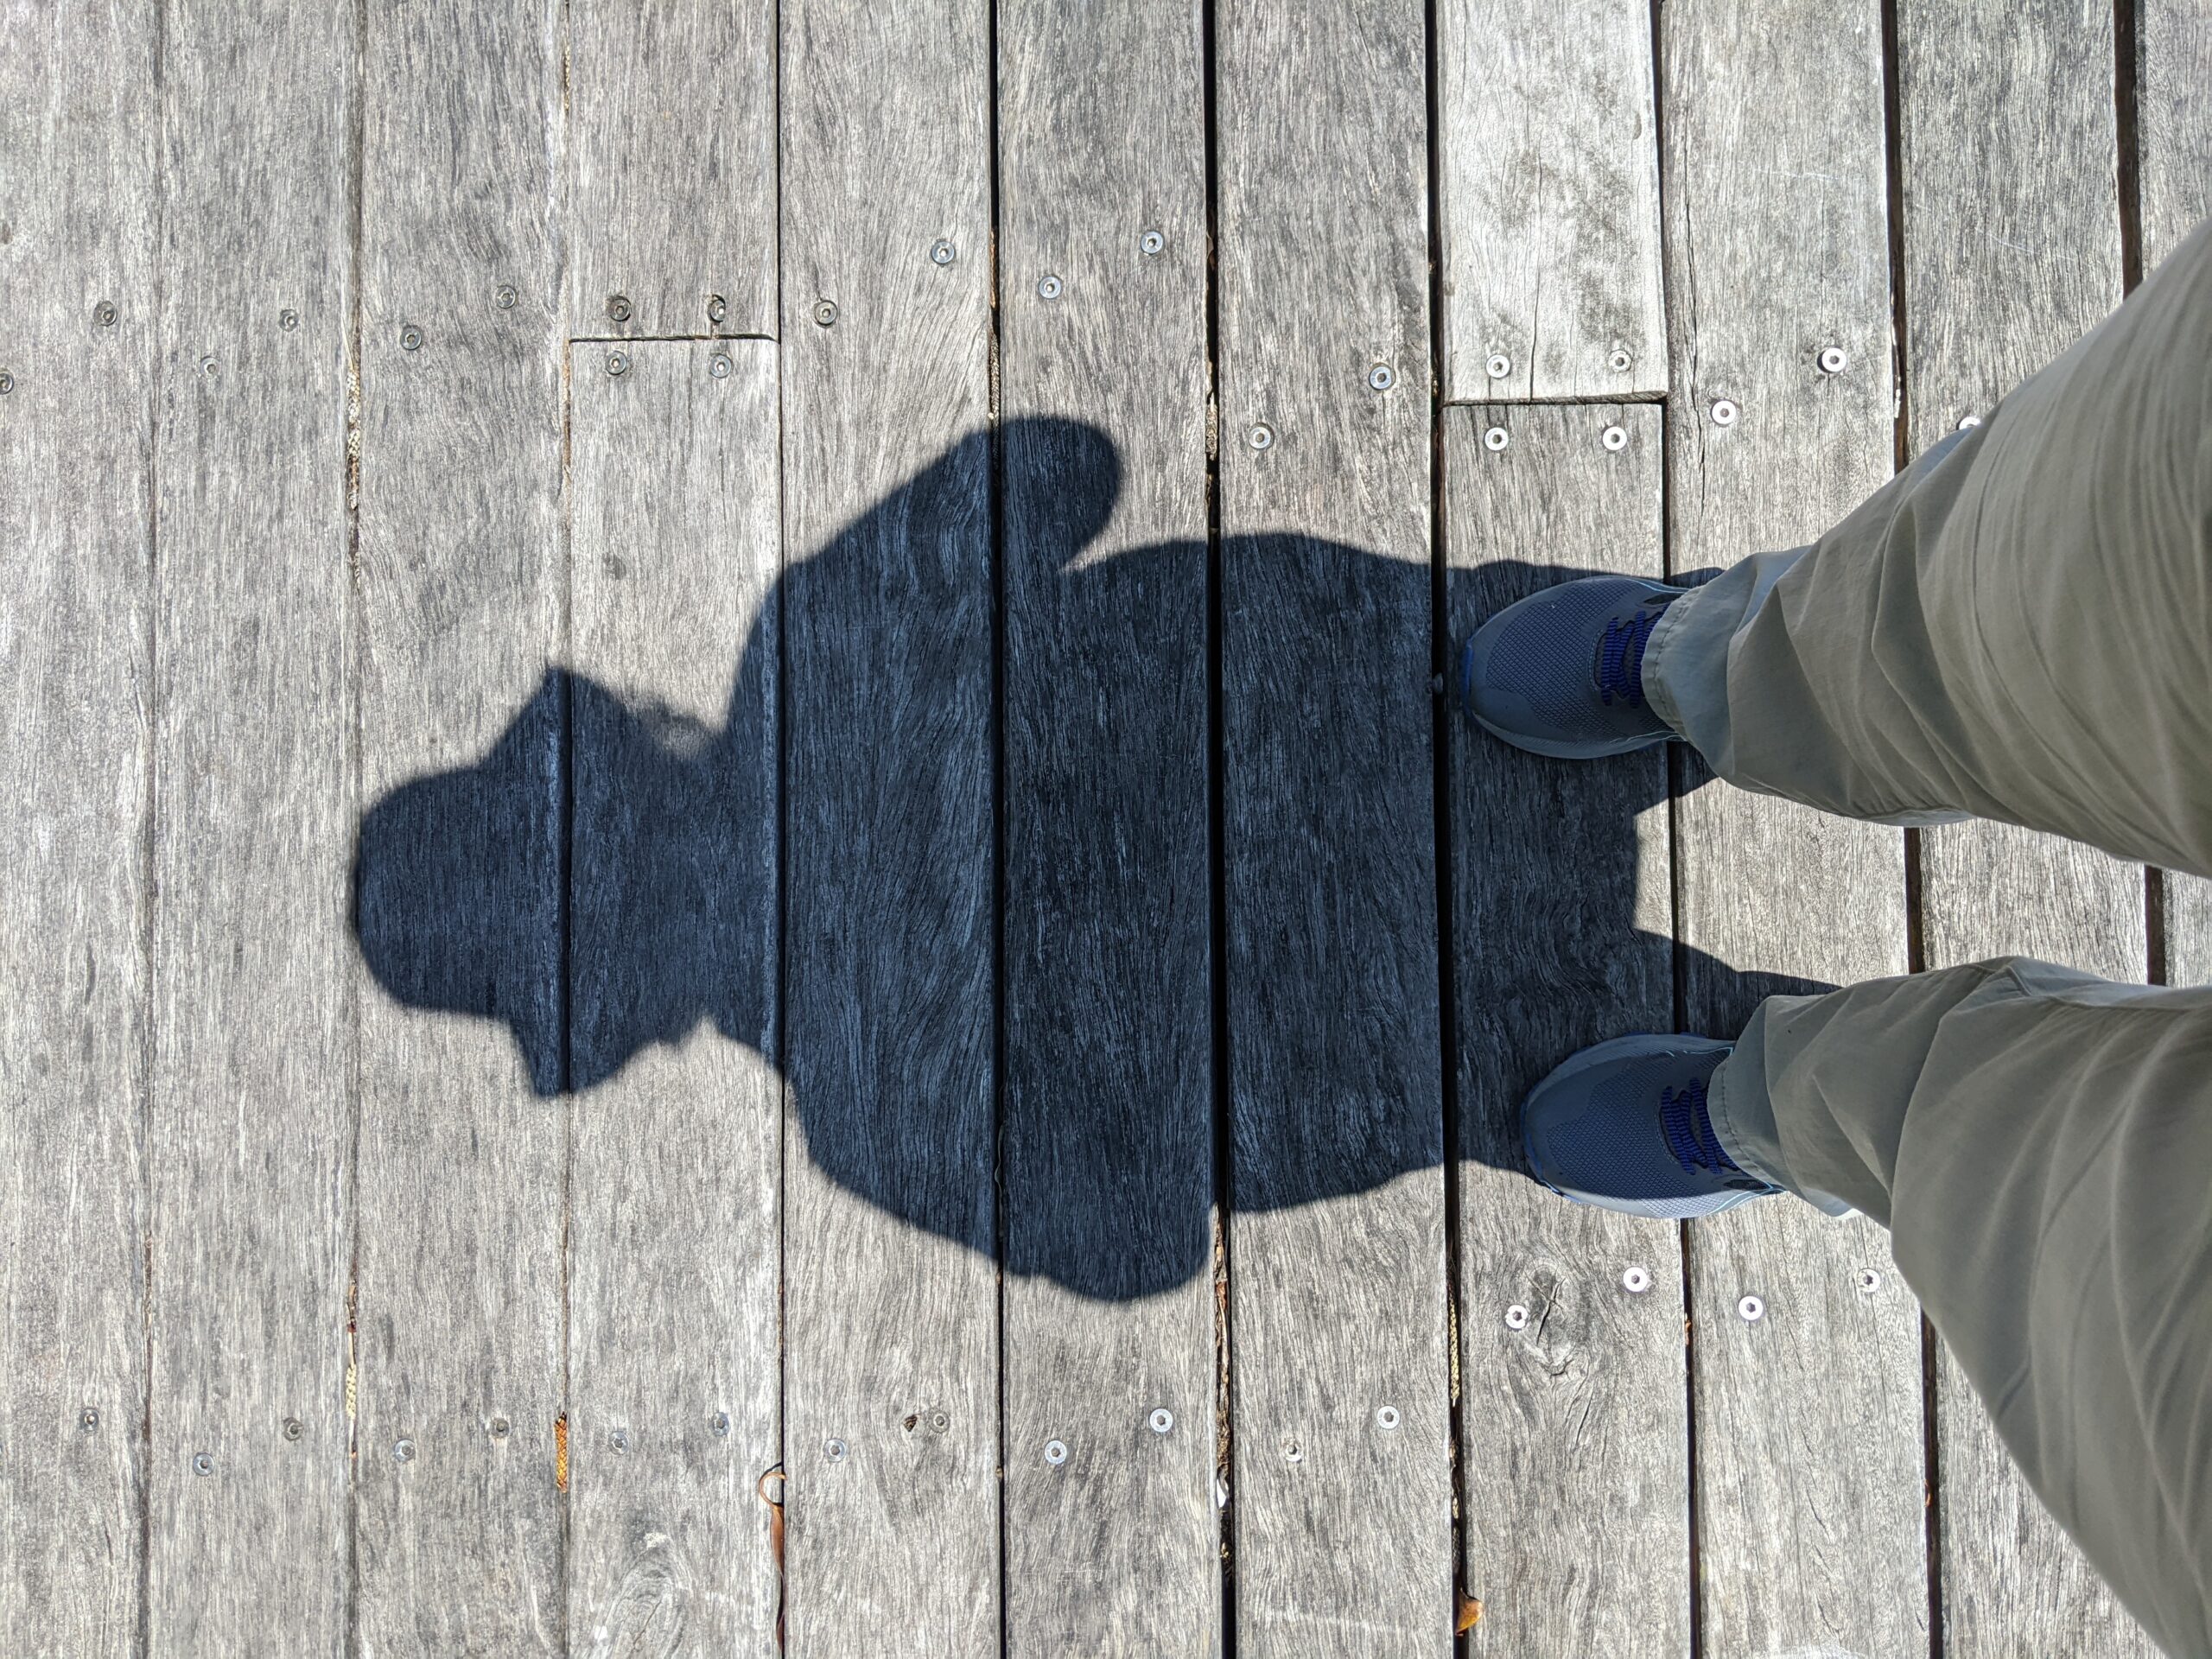 my midday shadow on an old wooden pier